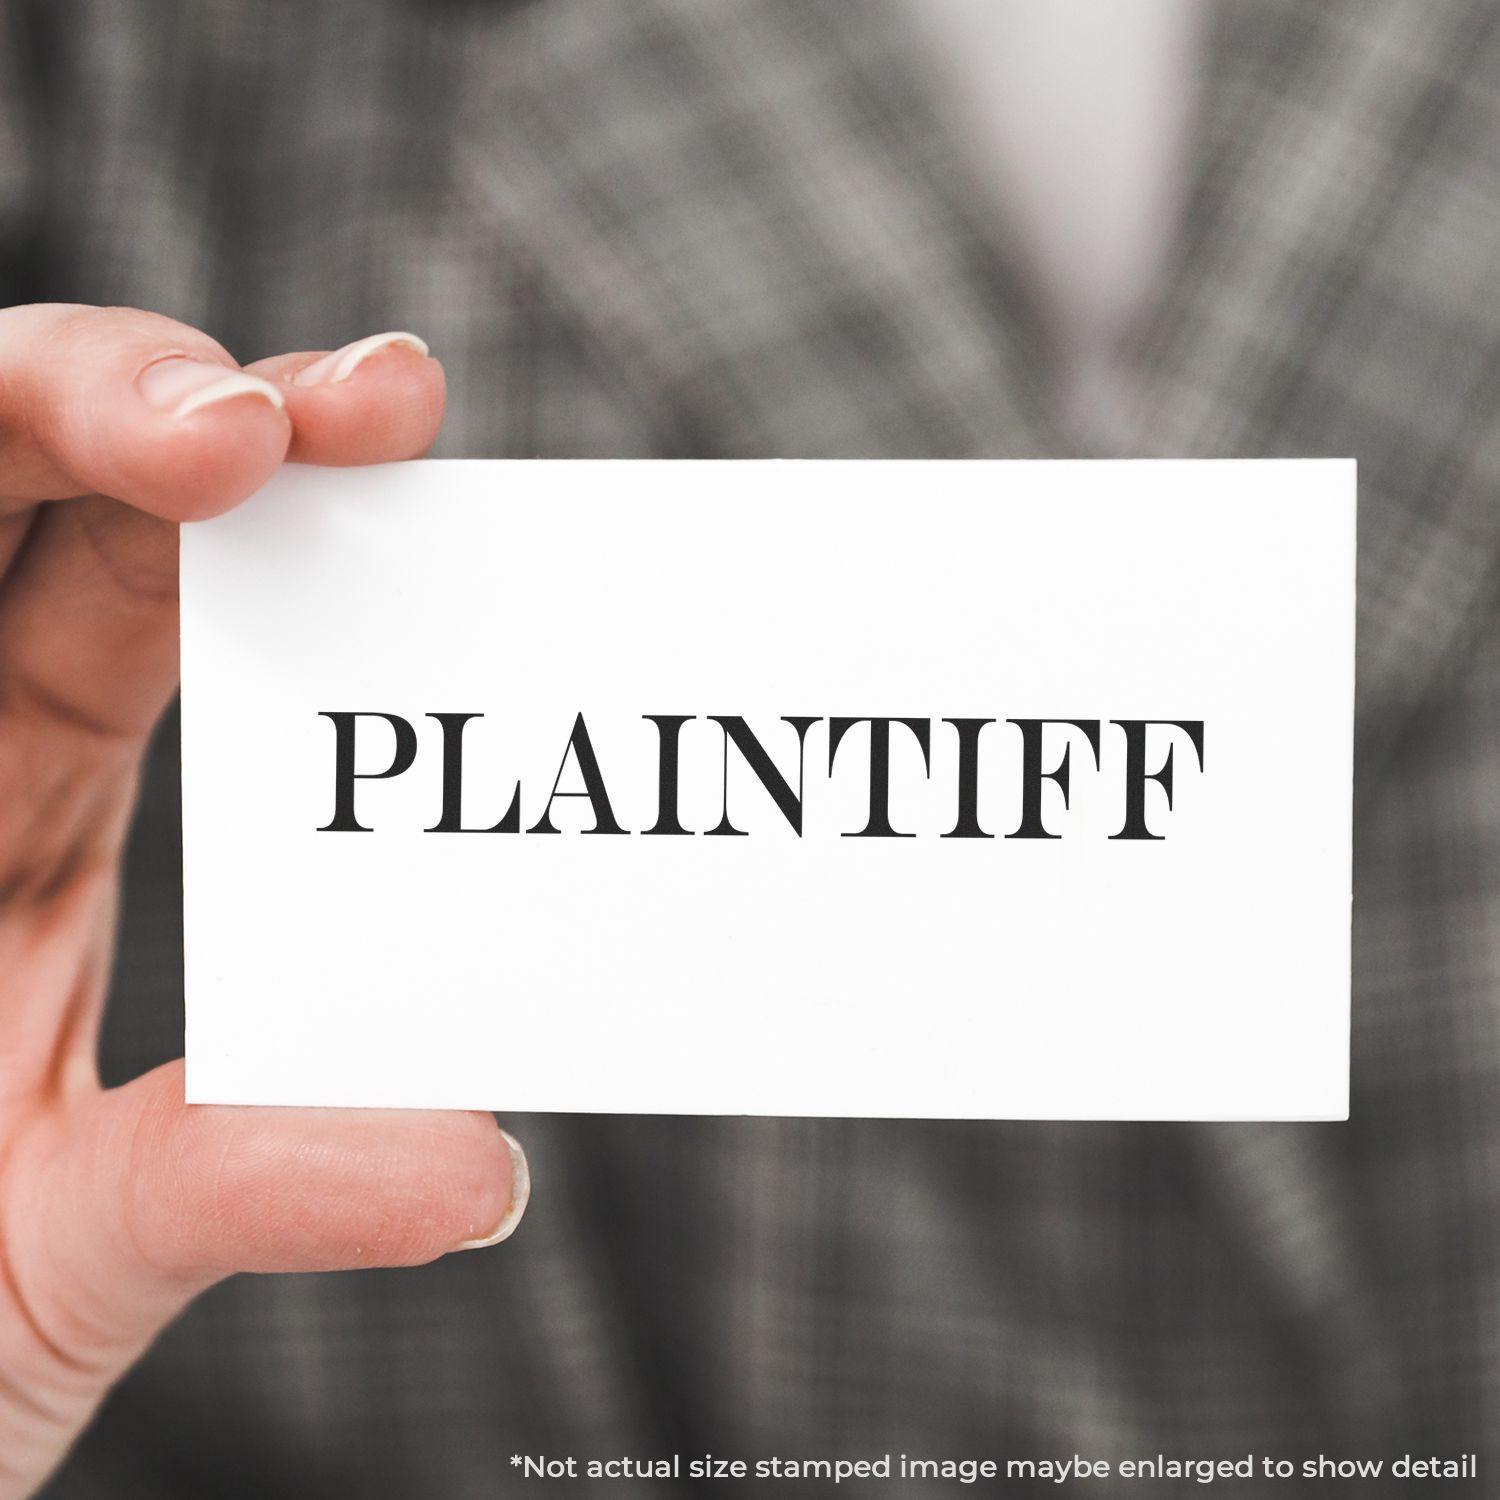 A stock office rubber stamp with a stamped image showing how the text "PLAINTIFF" in a large font is displayed after stamping.